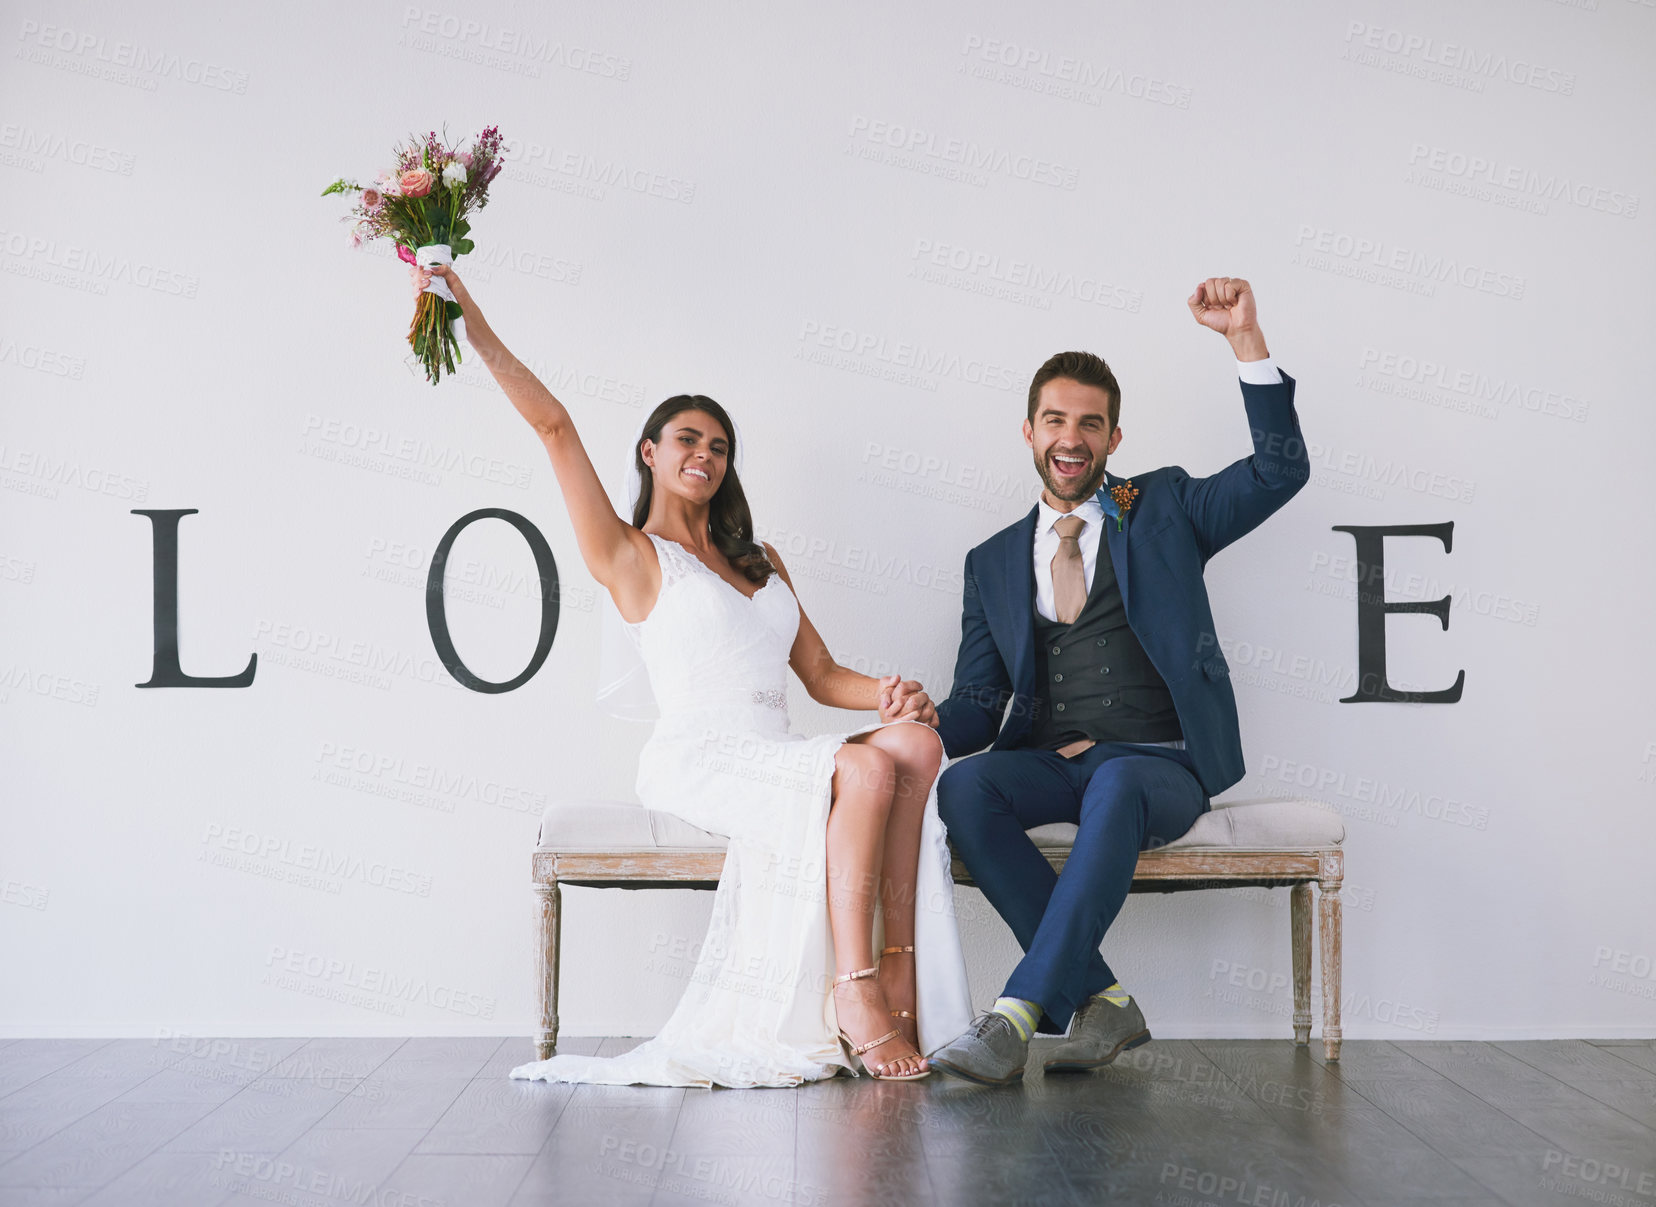 Buy stock photo Concept studio shot of a bride and groom making an V in the word “love” against a wall